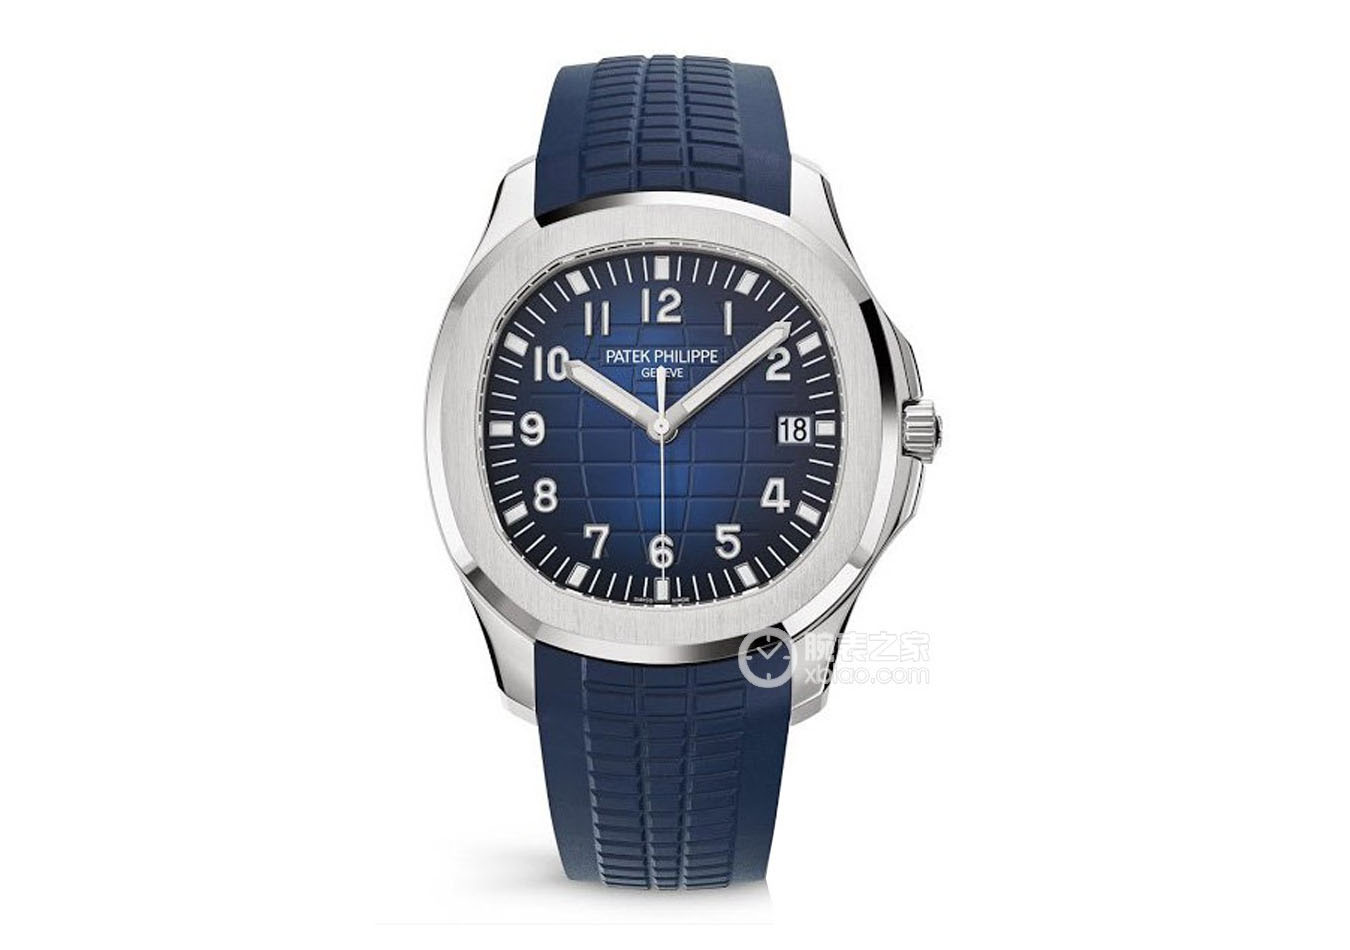 Introduction to the Patek Philippe AQUANAUT series 5168G-001 by 3K Factory